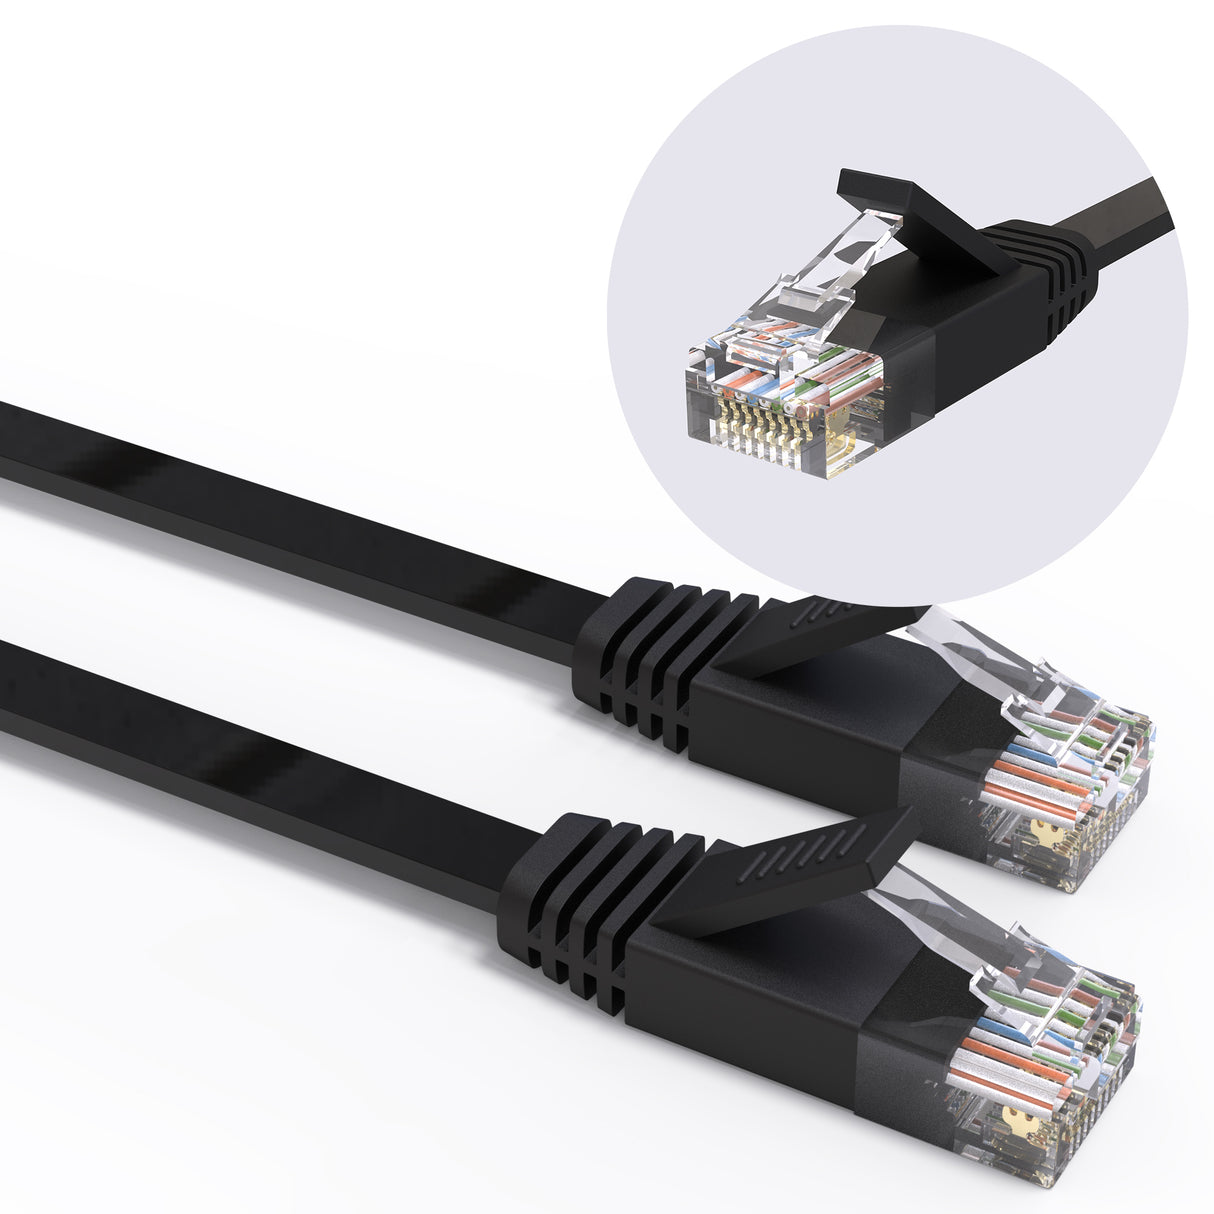 VANDESAIL Cat 6 Ethernet Cable Flat,10Gbps High-Speed, Snagless Design in Sleek Black